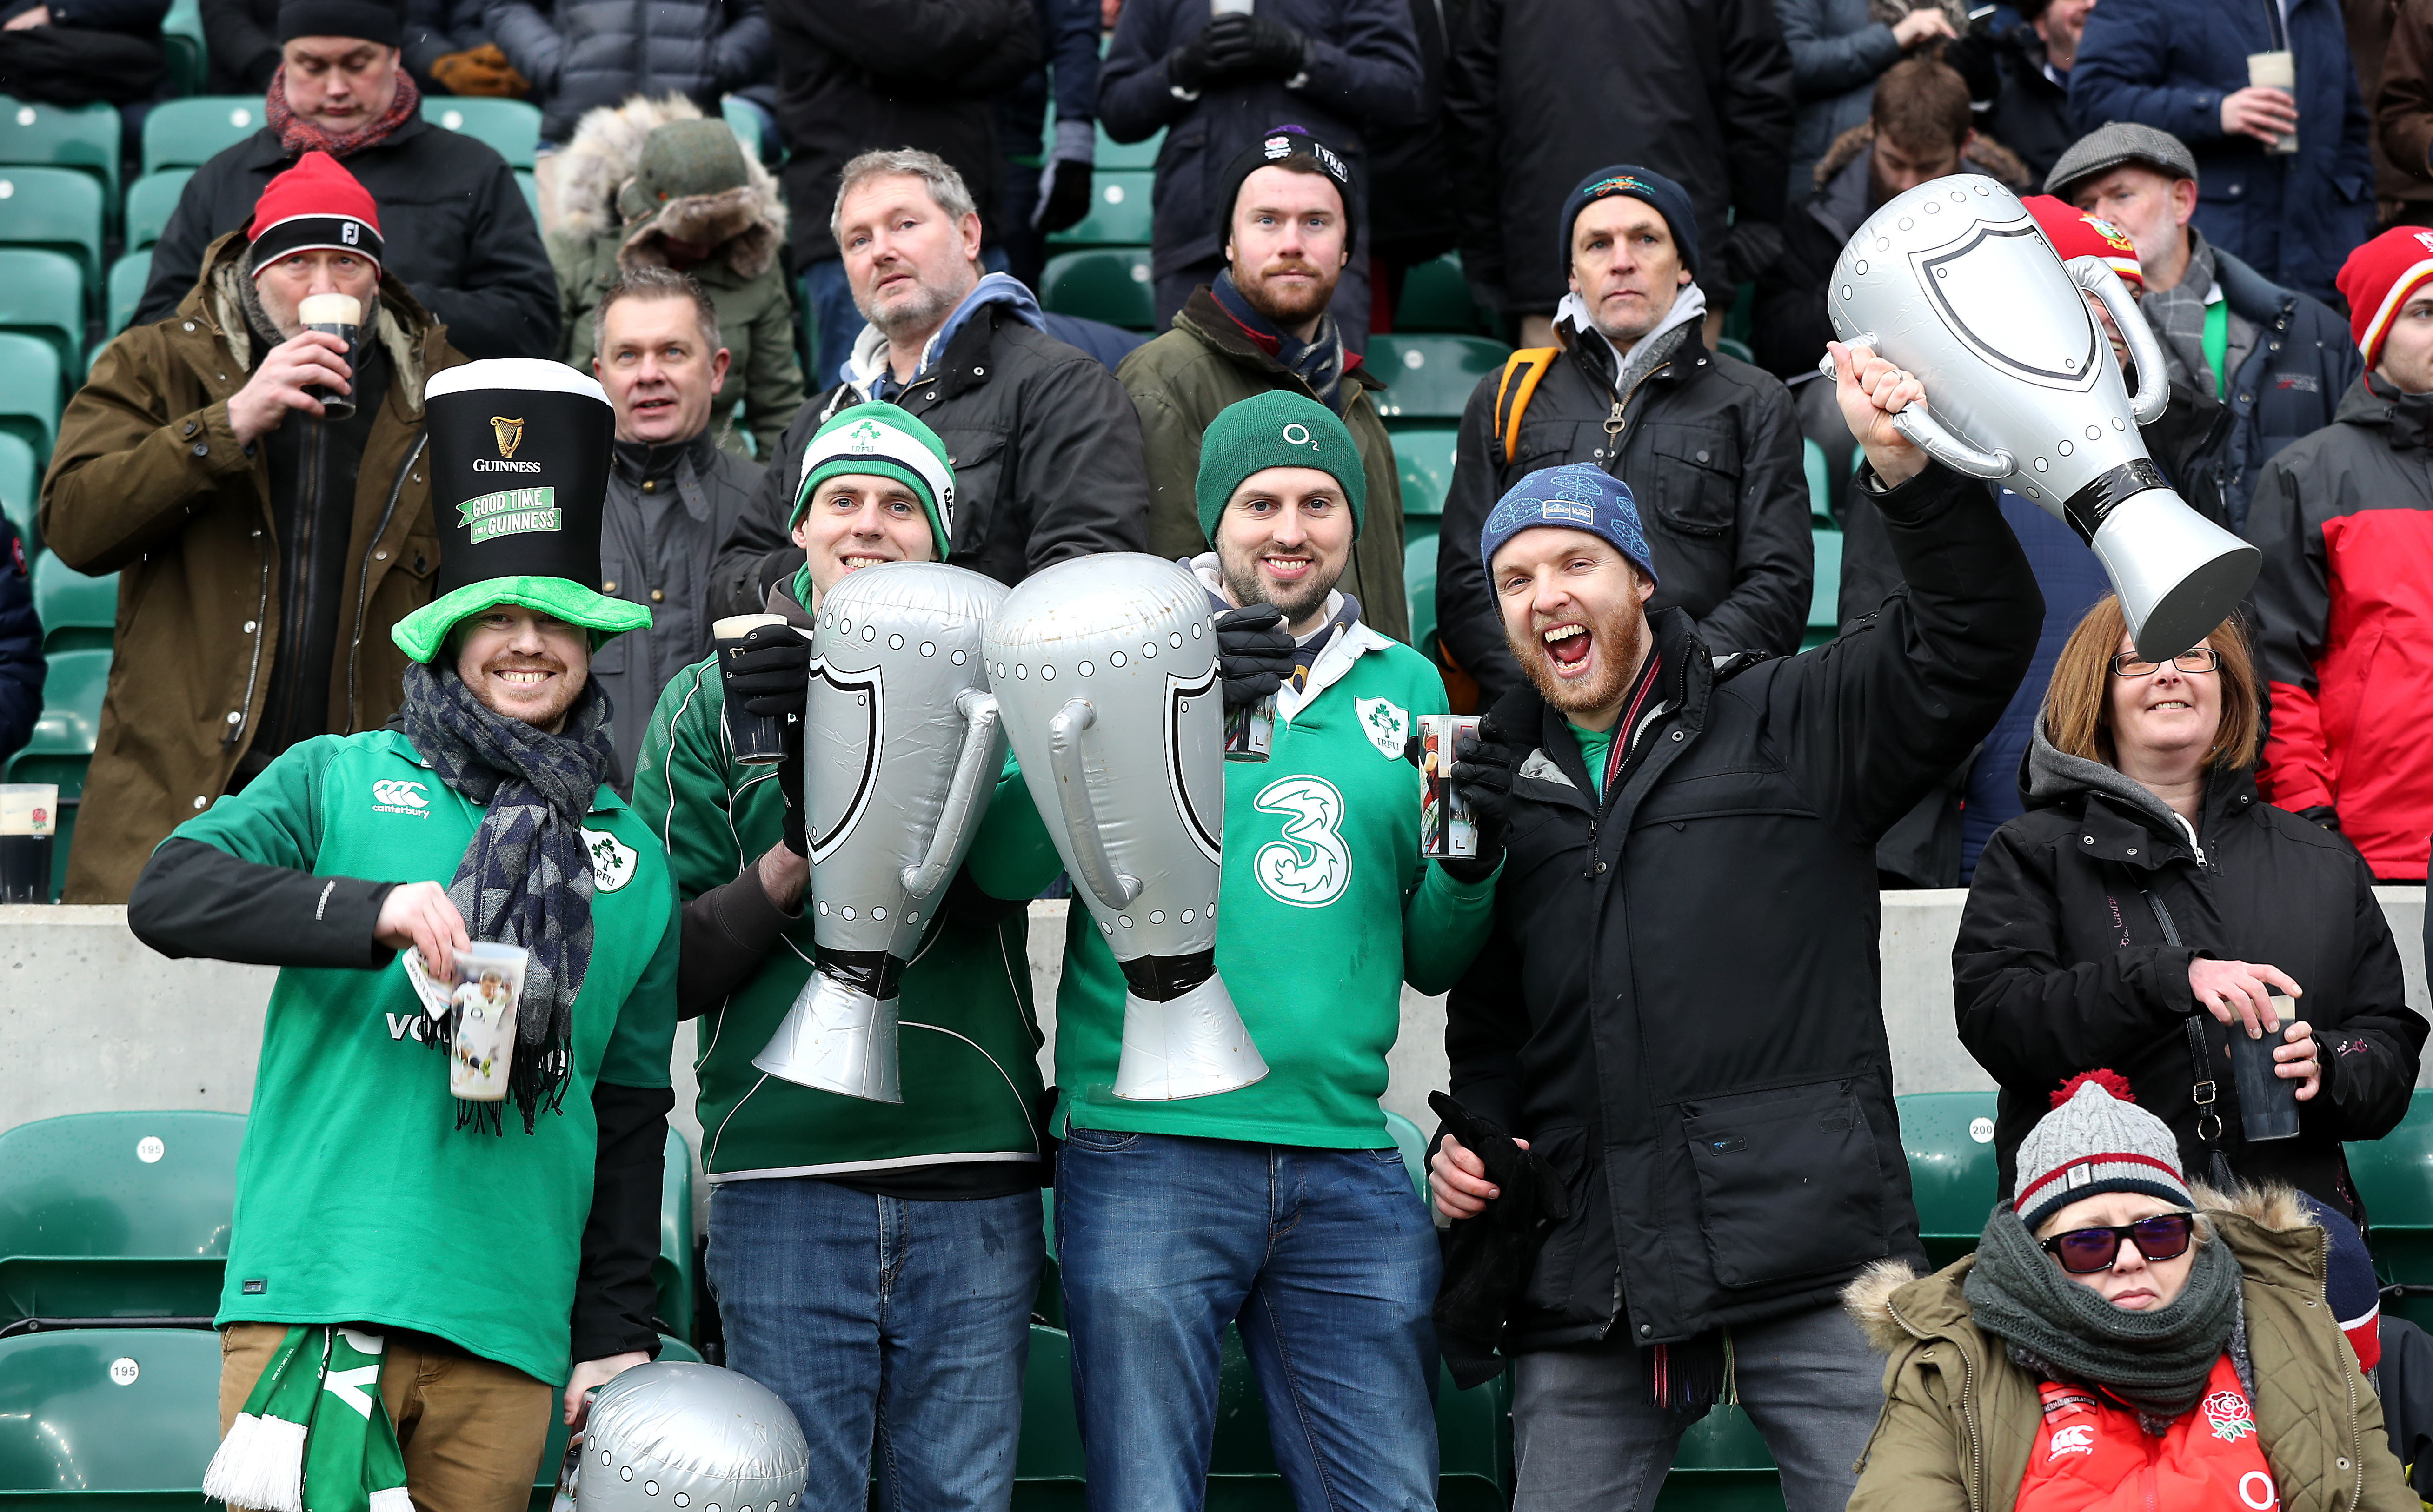 Ireland fans in the stands during the NatWest 6 Nations match at Twickenham Stadium, London